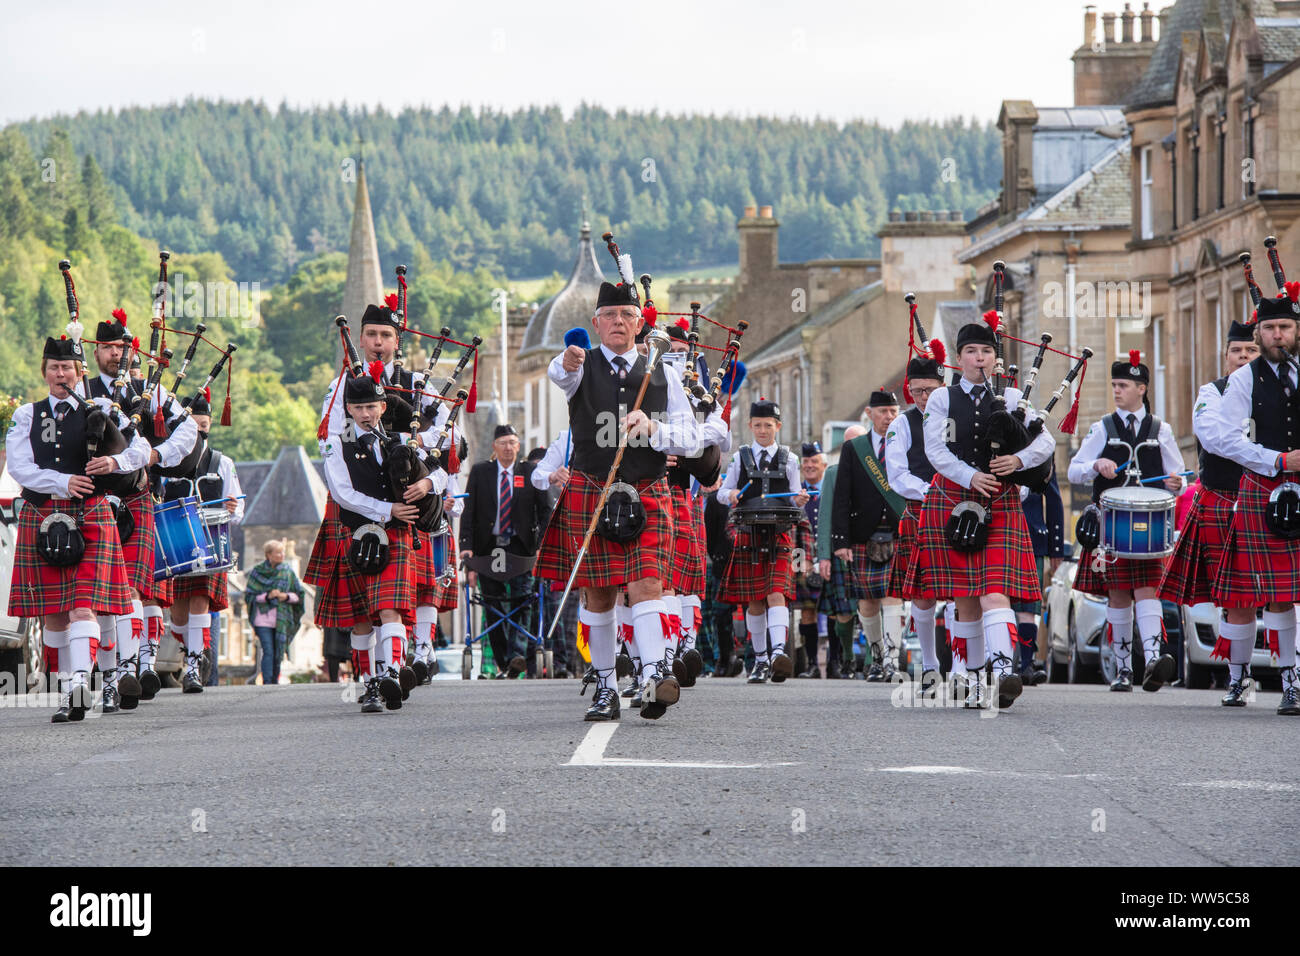 Chieftains Parade along the high street in Peebles. Start of the Peebles highland games. Scottish borders, Scotland Stock Photo